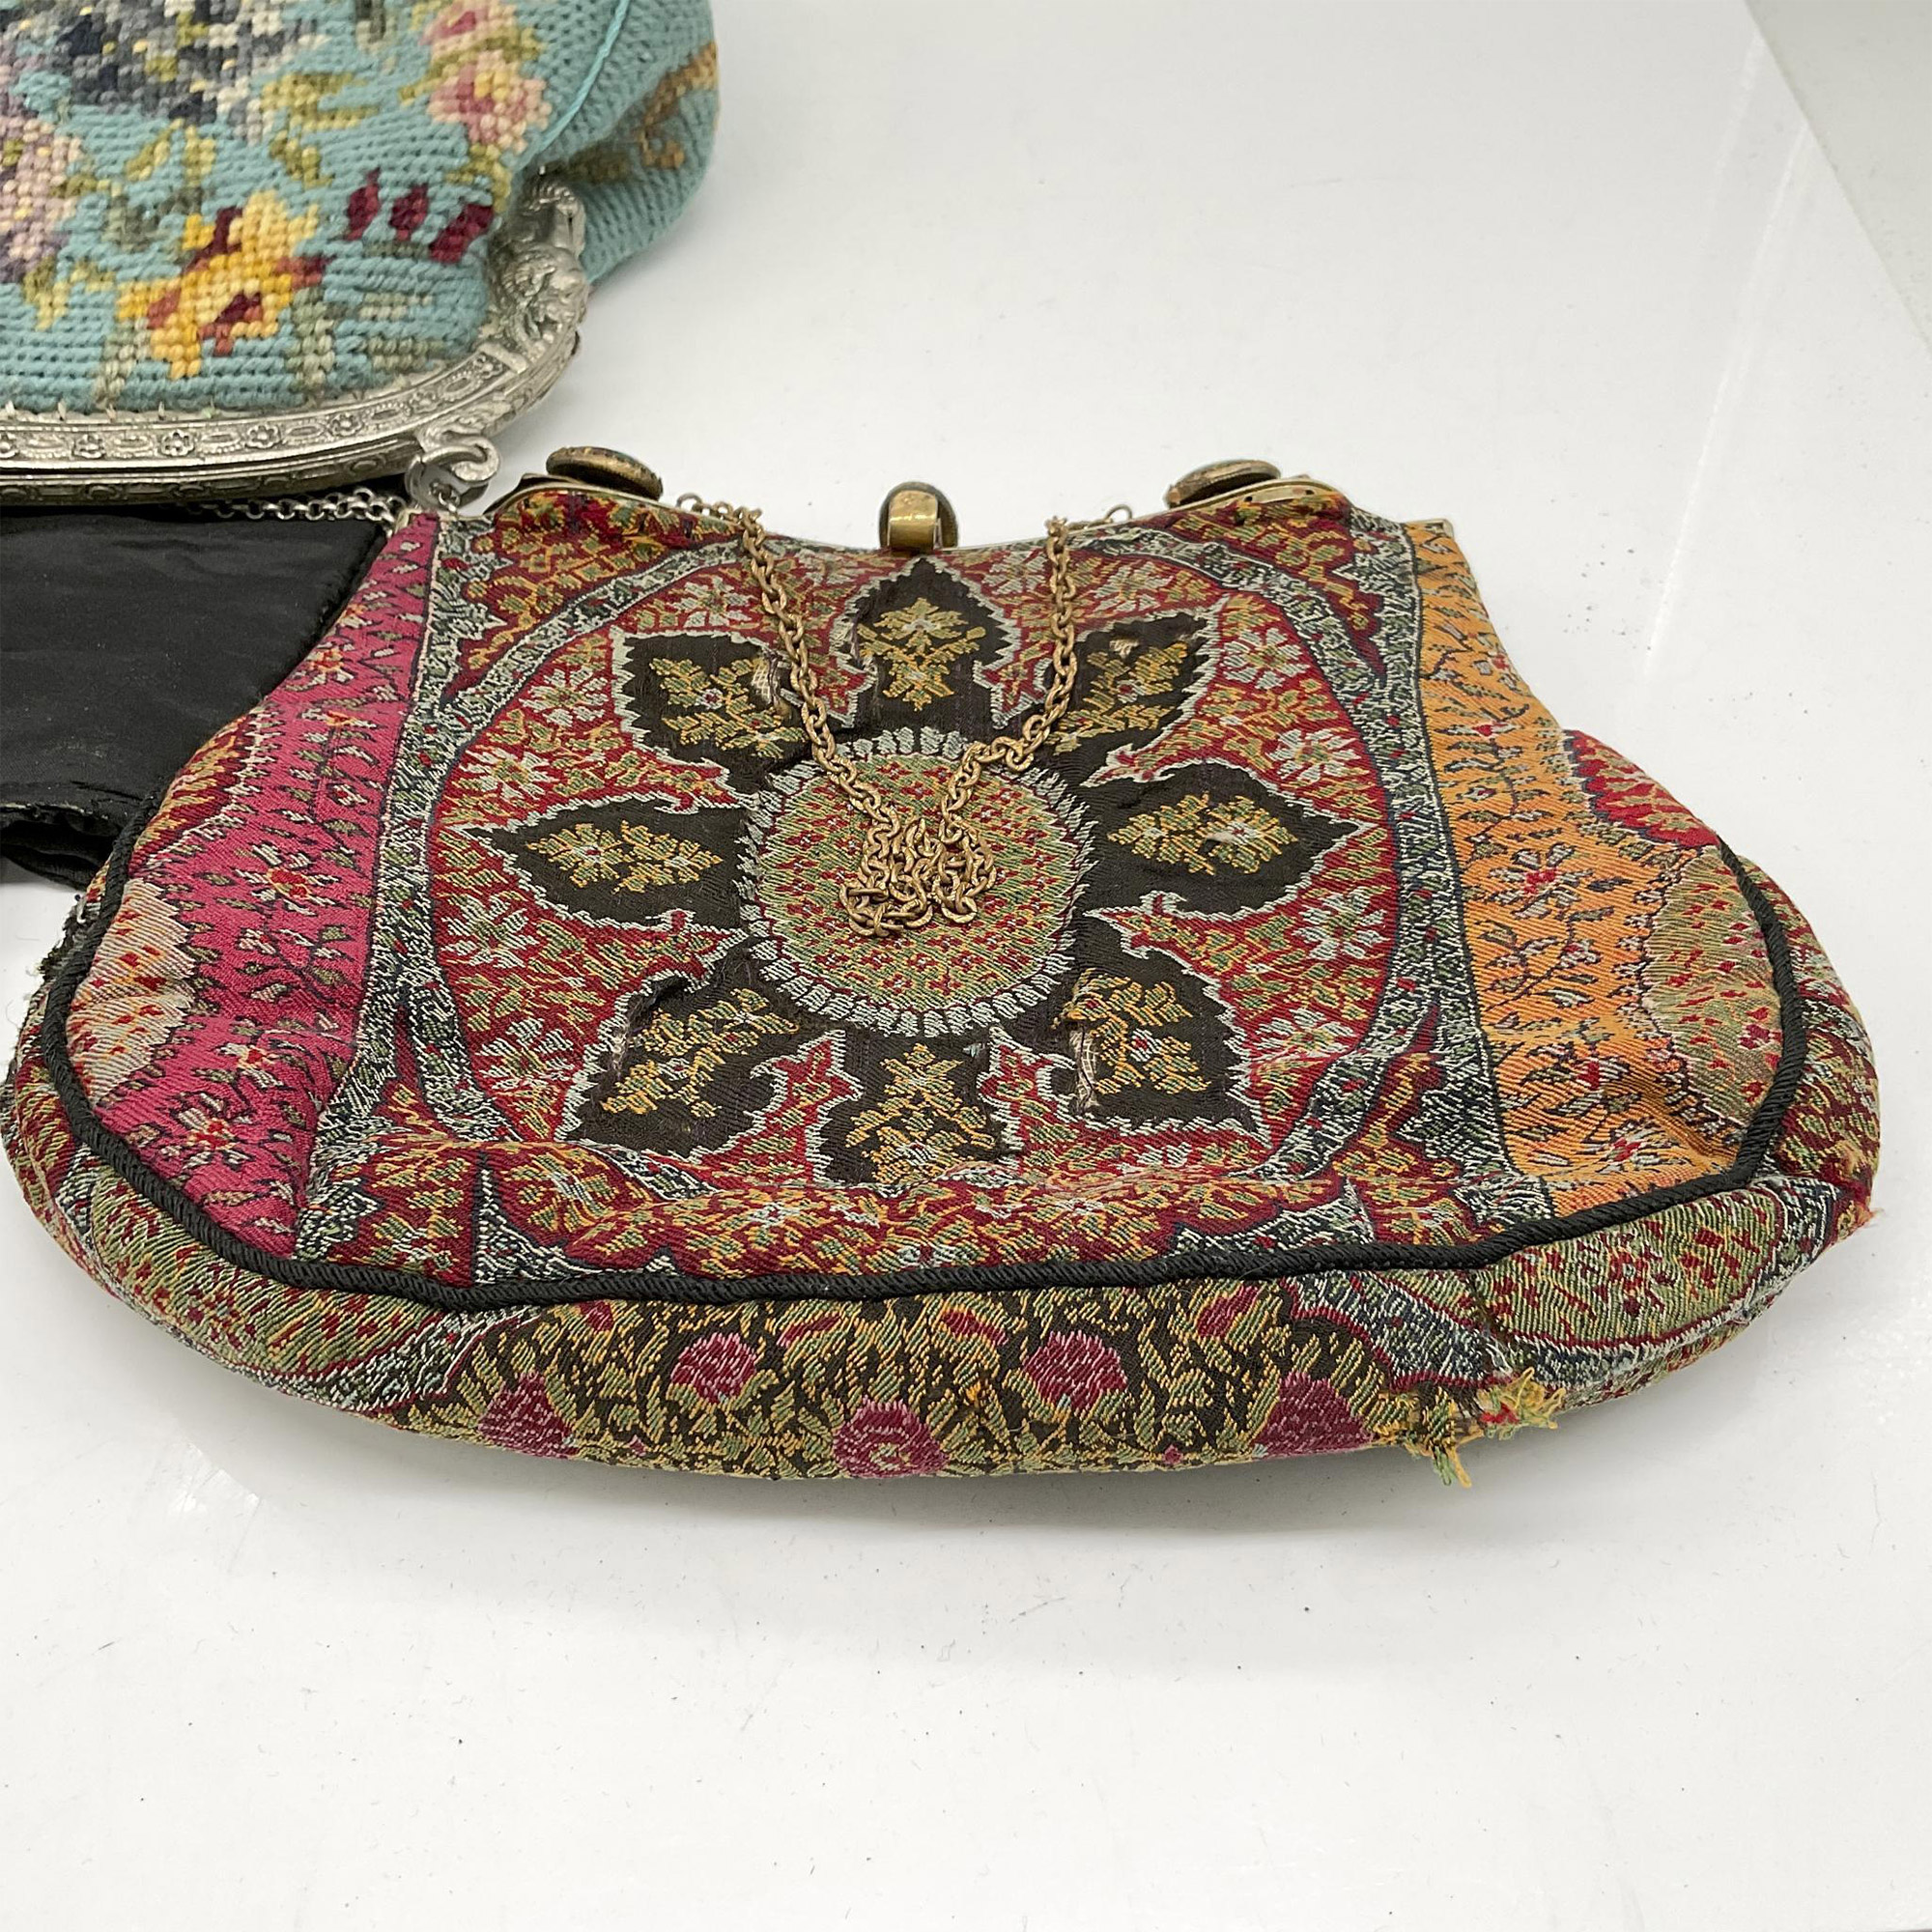 3pc Fabric and Embroidered Purses - Image 3 of 3